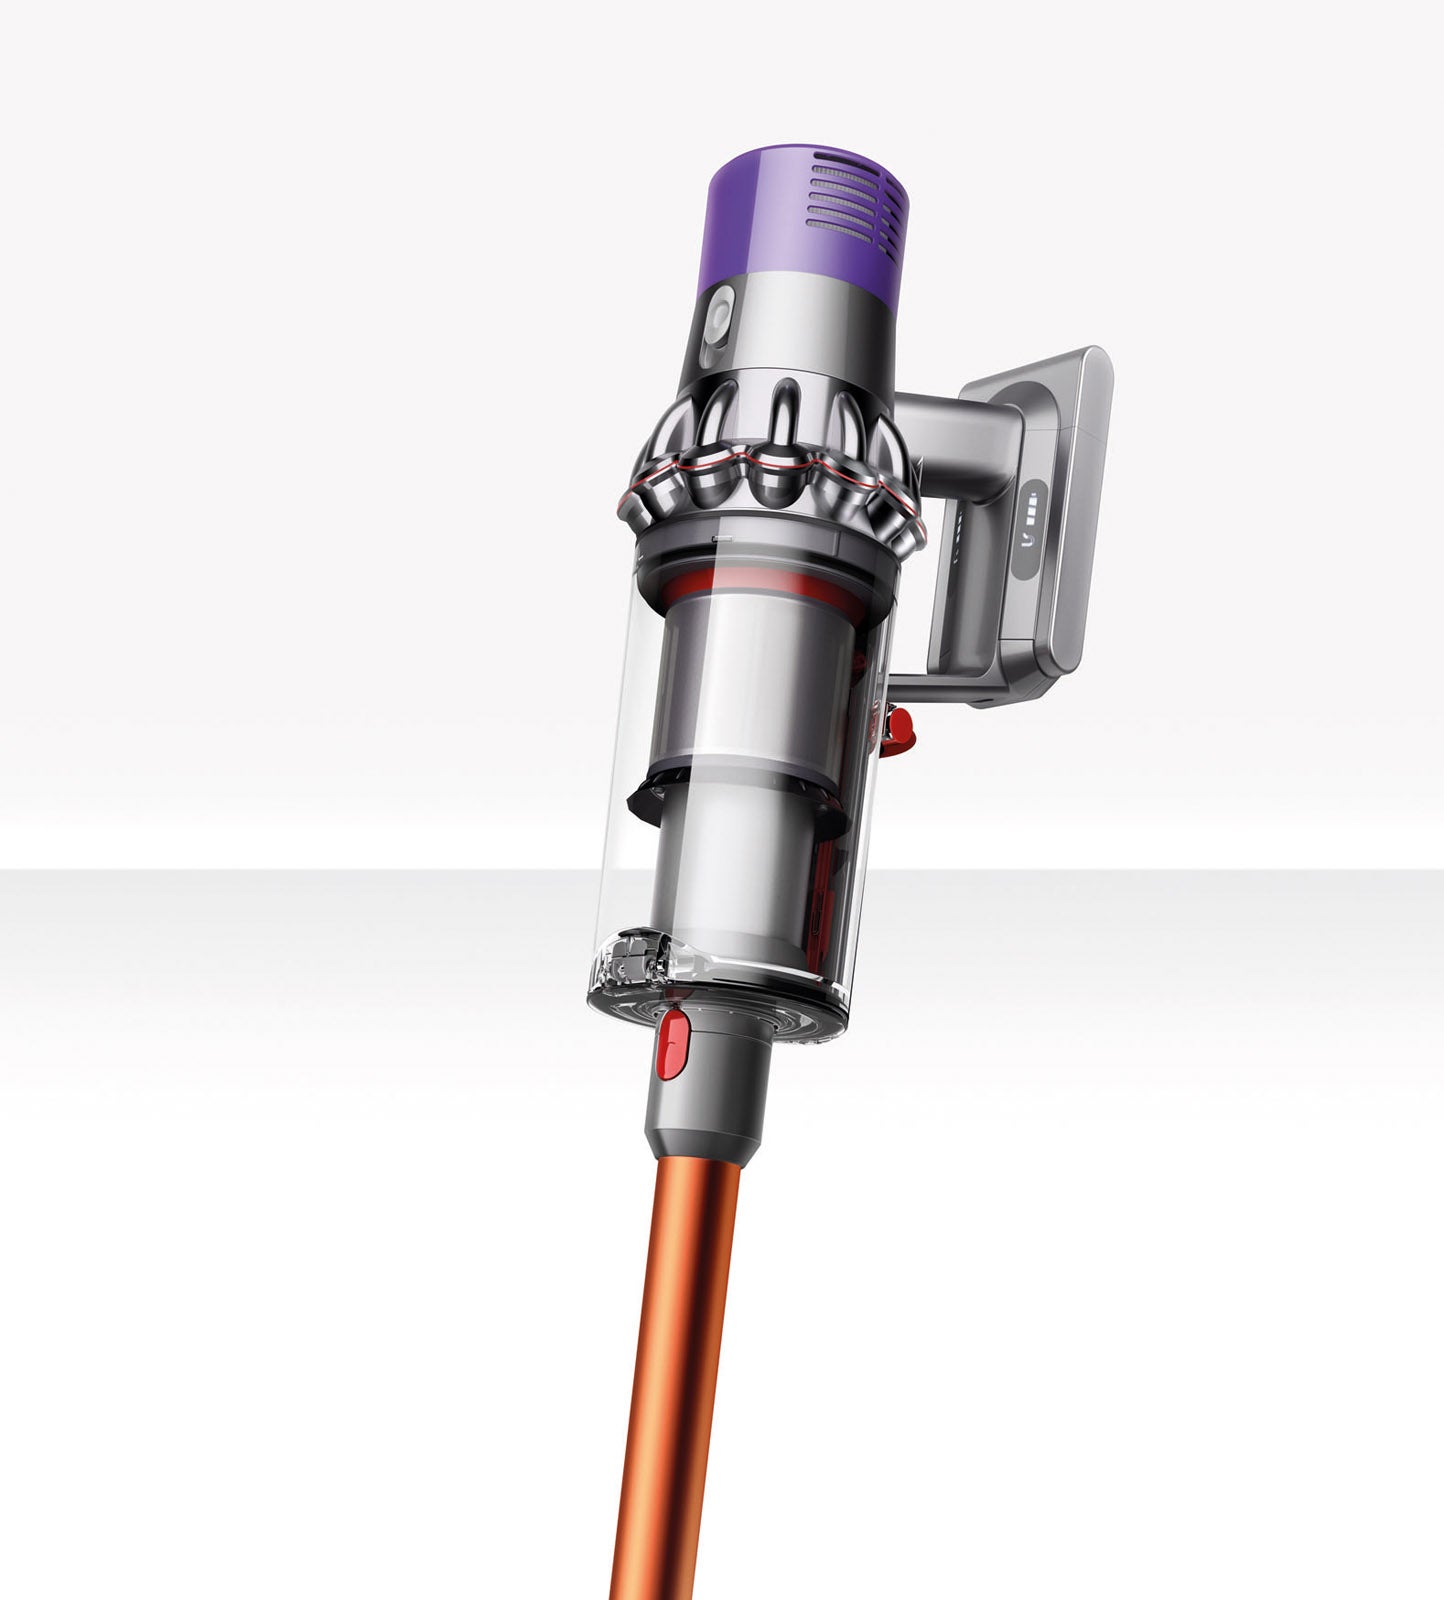 Dyson Cyclone V10 Absolute cordless vacuum cleaner.